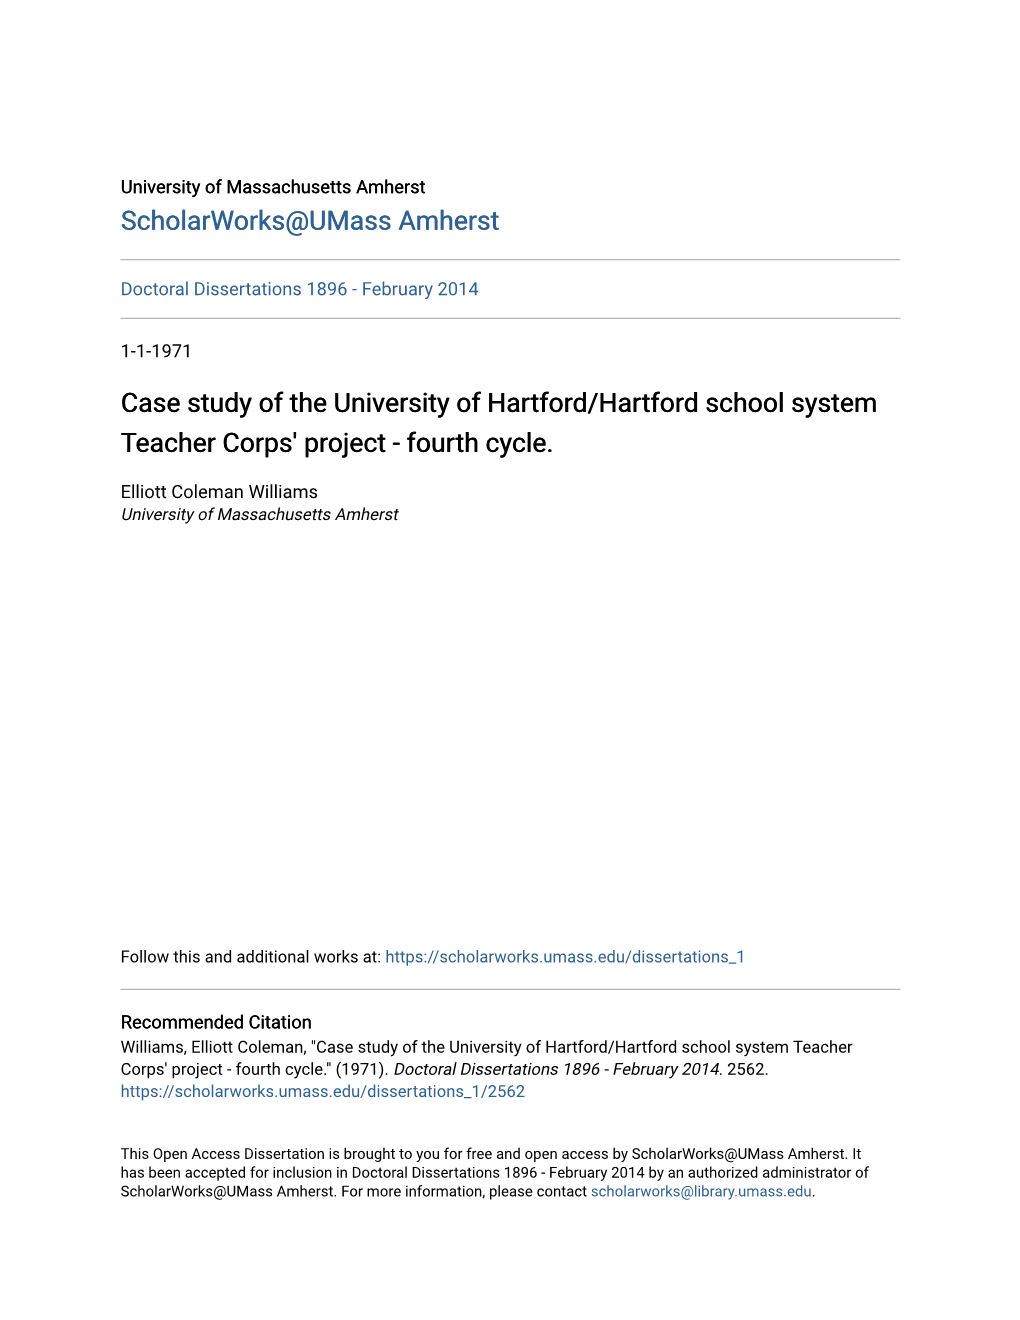 Case Study of the University of Hartford/Hartford School System Teacher Corps' Project - Fourth Cycle